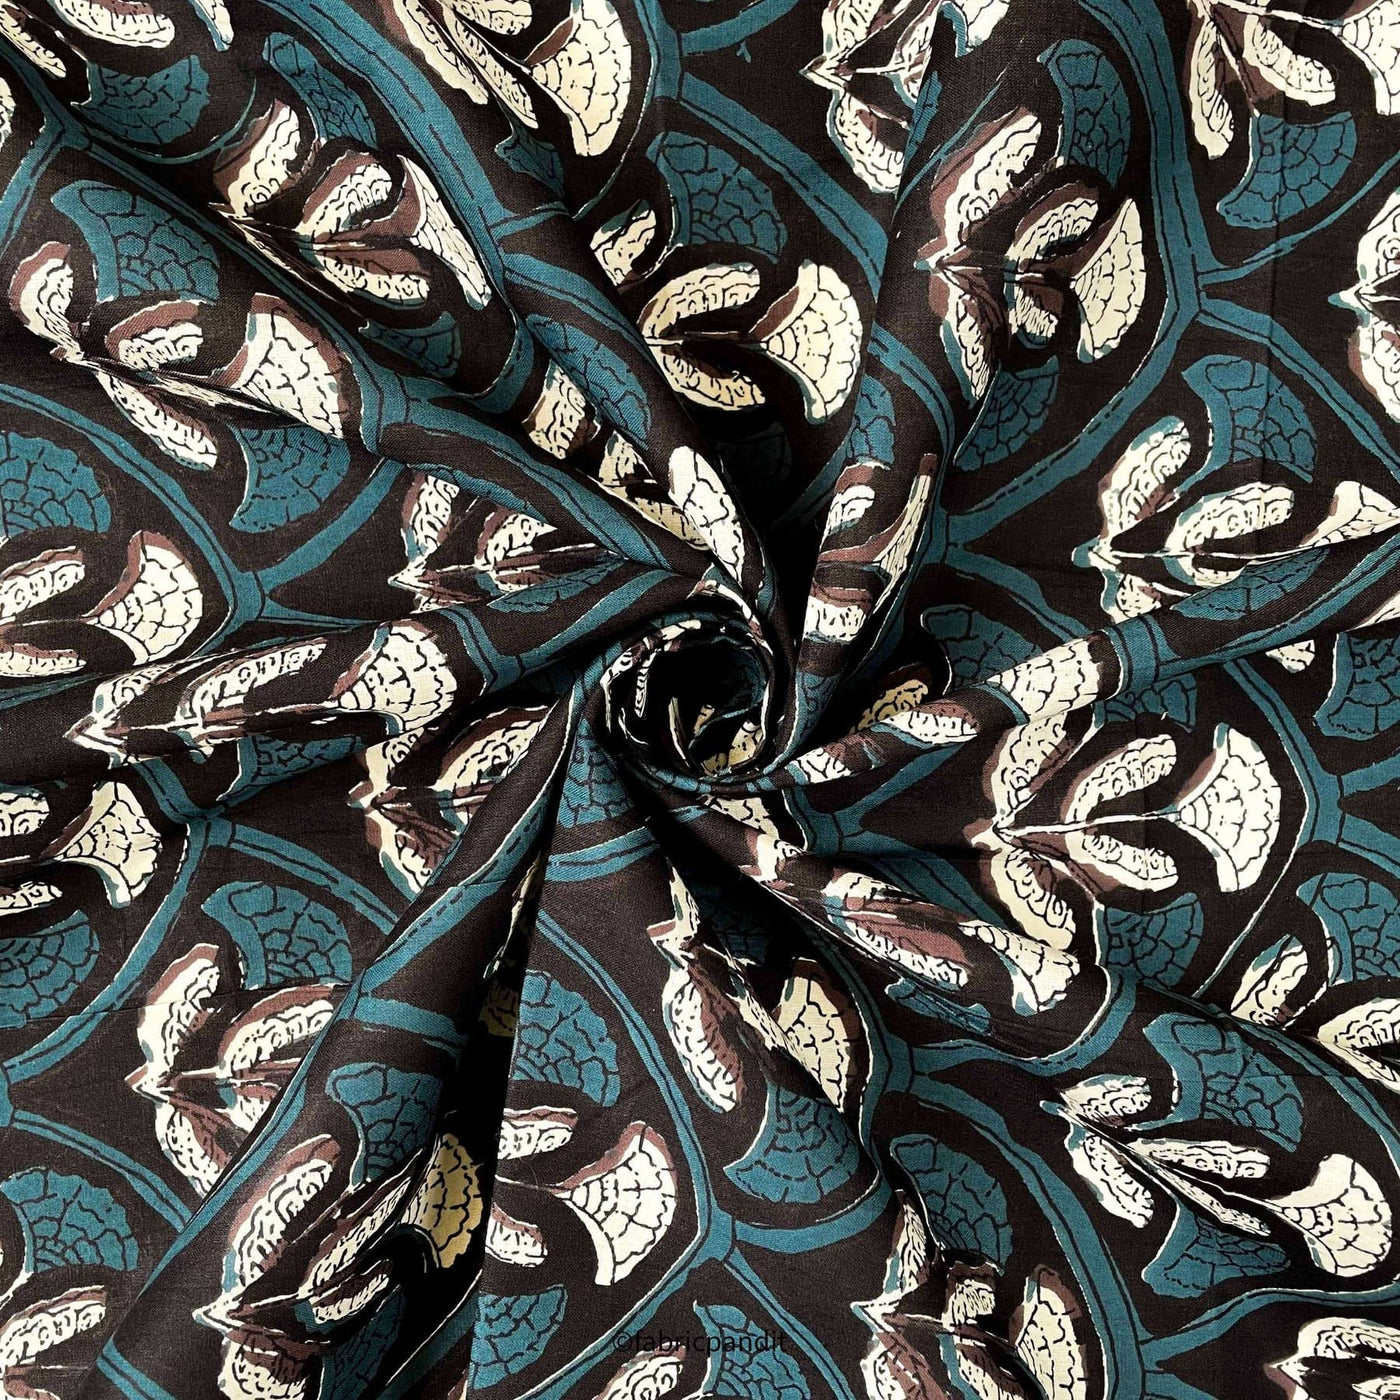 Fabric Pandit Fabric Black and Dusty Blue Egyptian Tulips Hand Block Printed Pure Cotton Modal Fabric (Width 42 inches)